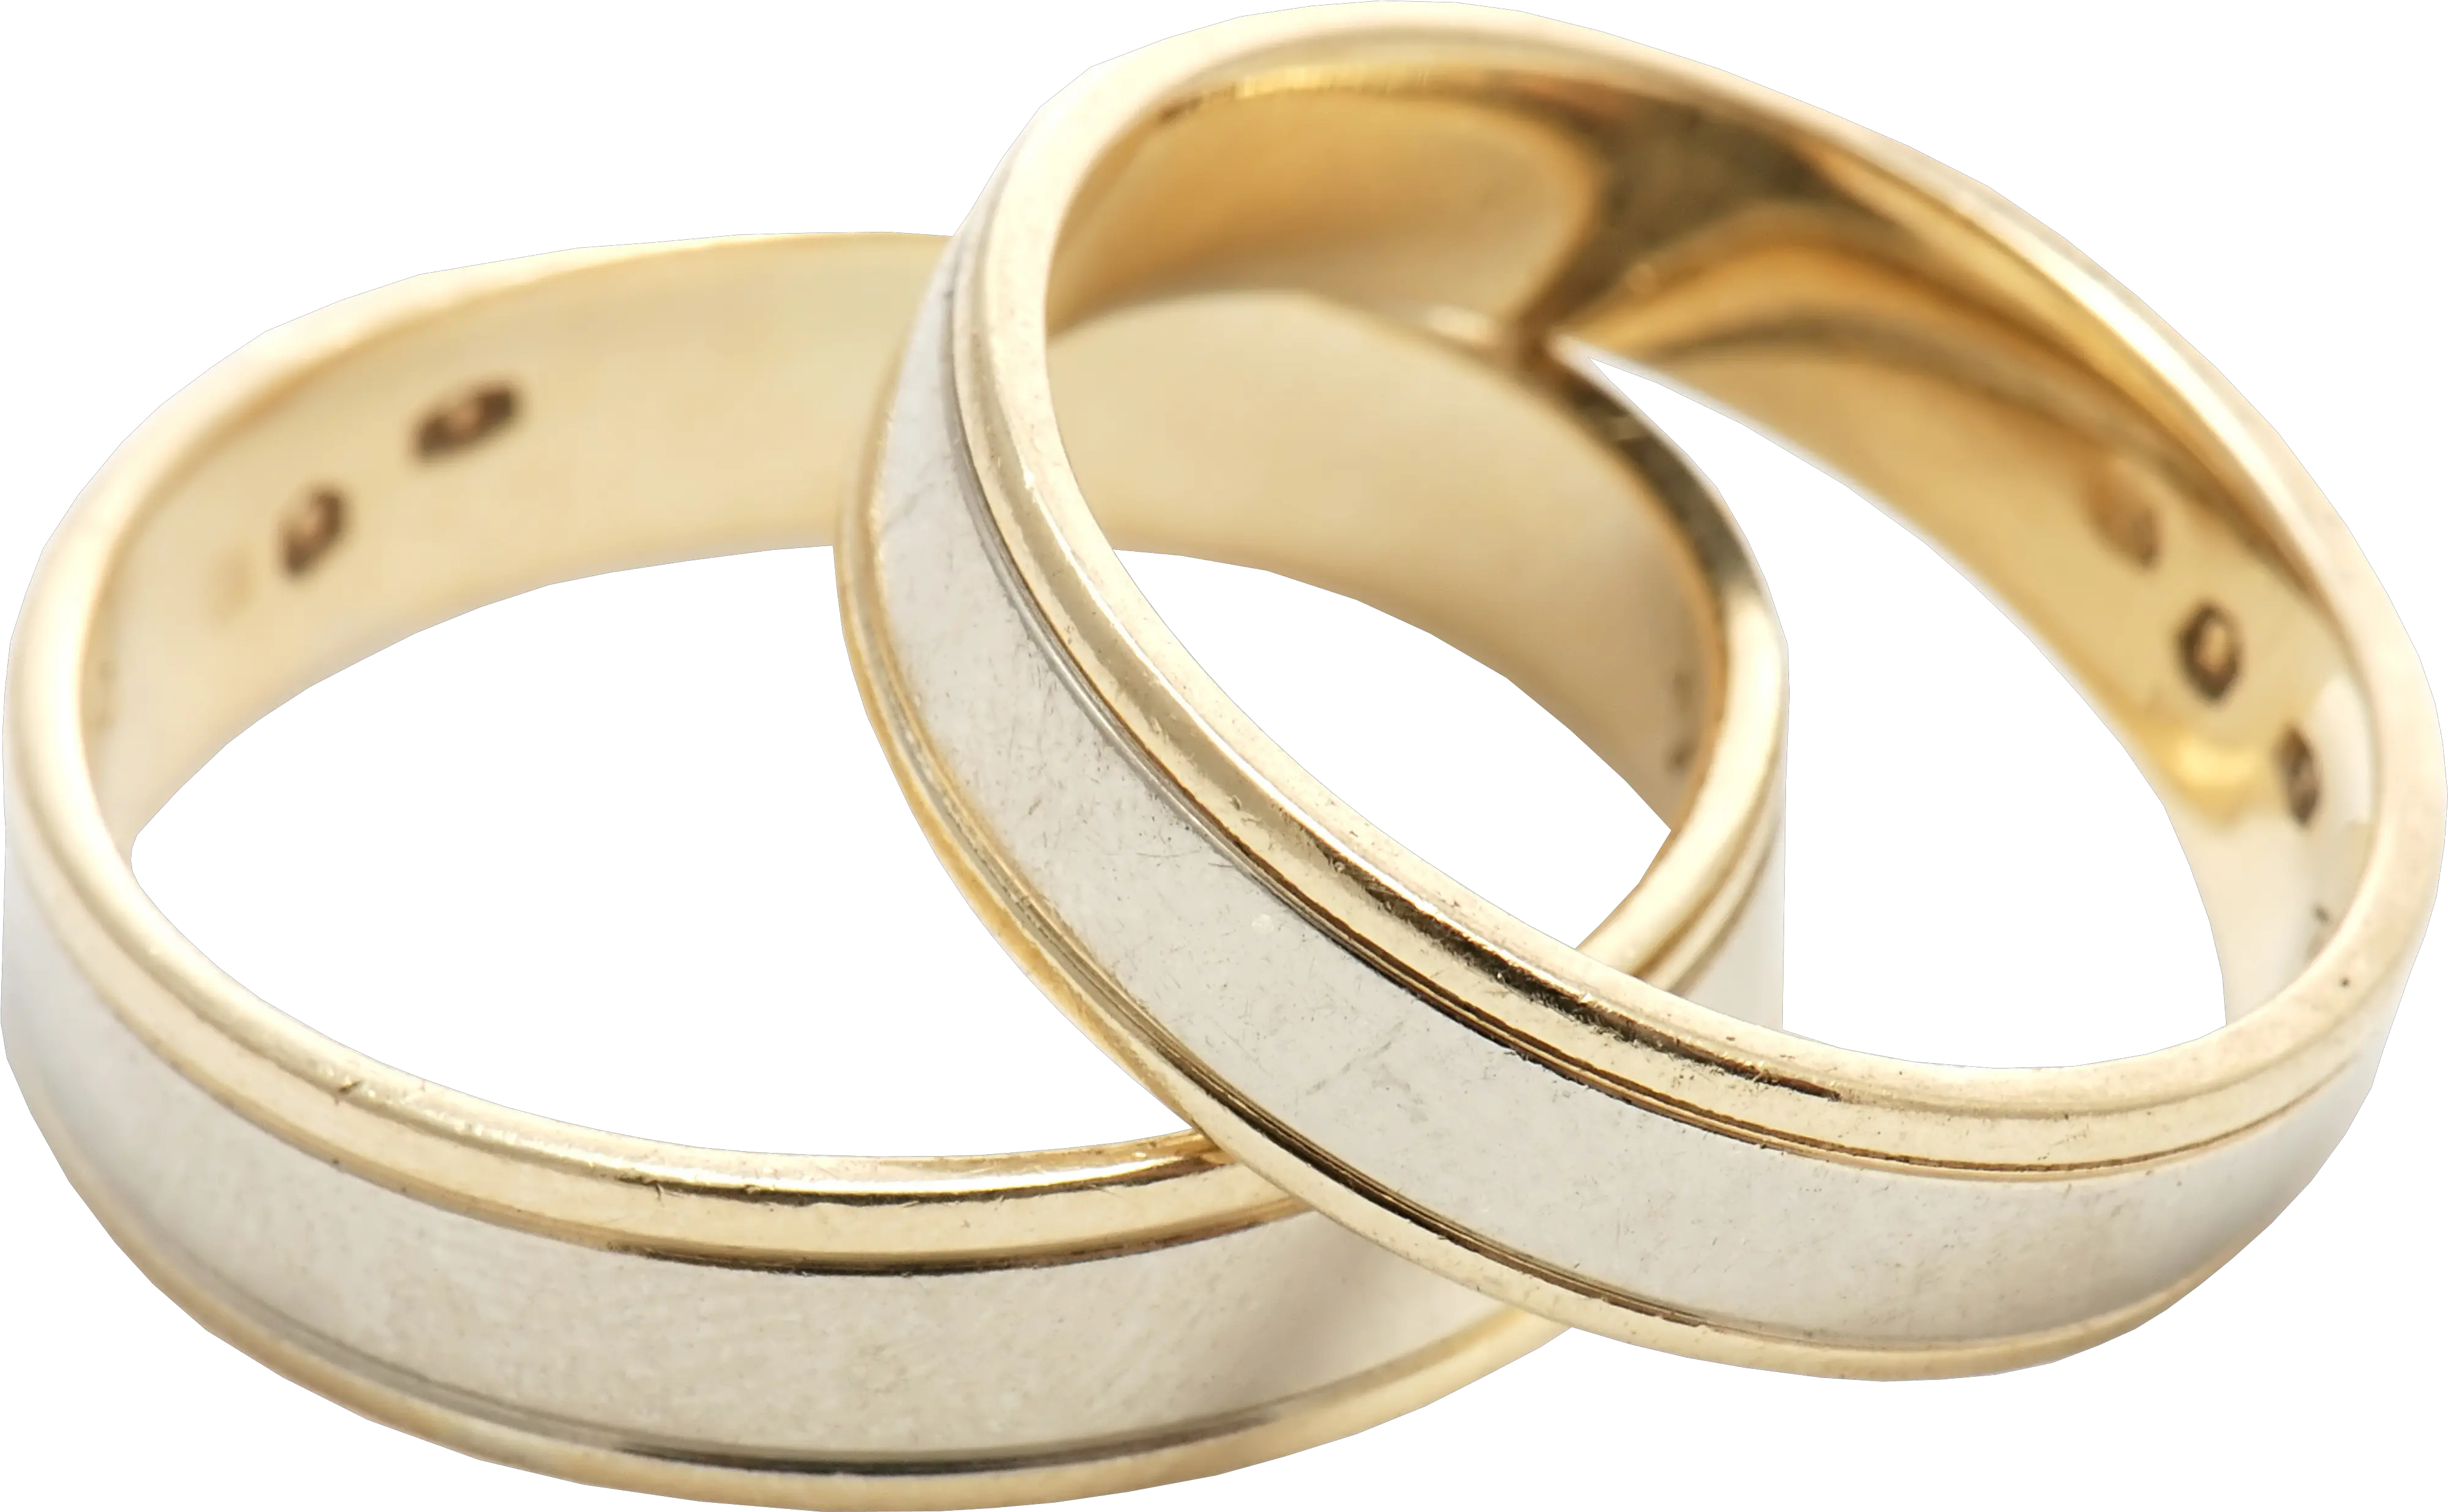 Wedding Ring Png Clipart Jewelry Images Free White Gold With Yellow Gold Lining Rings Rings Png